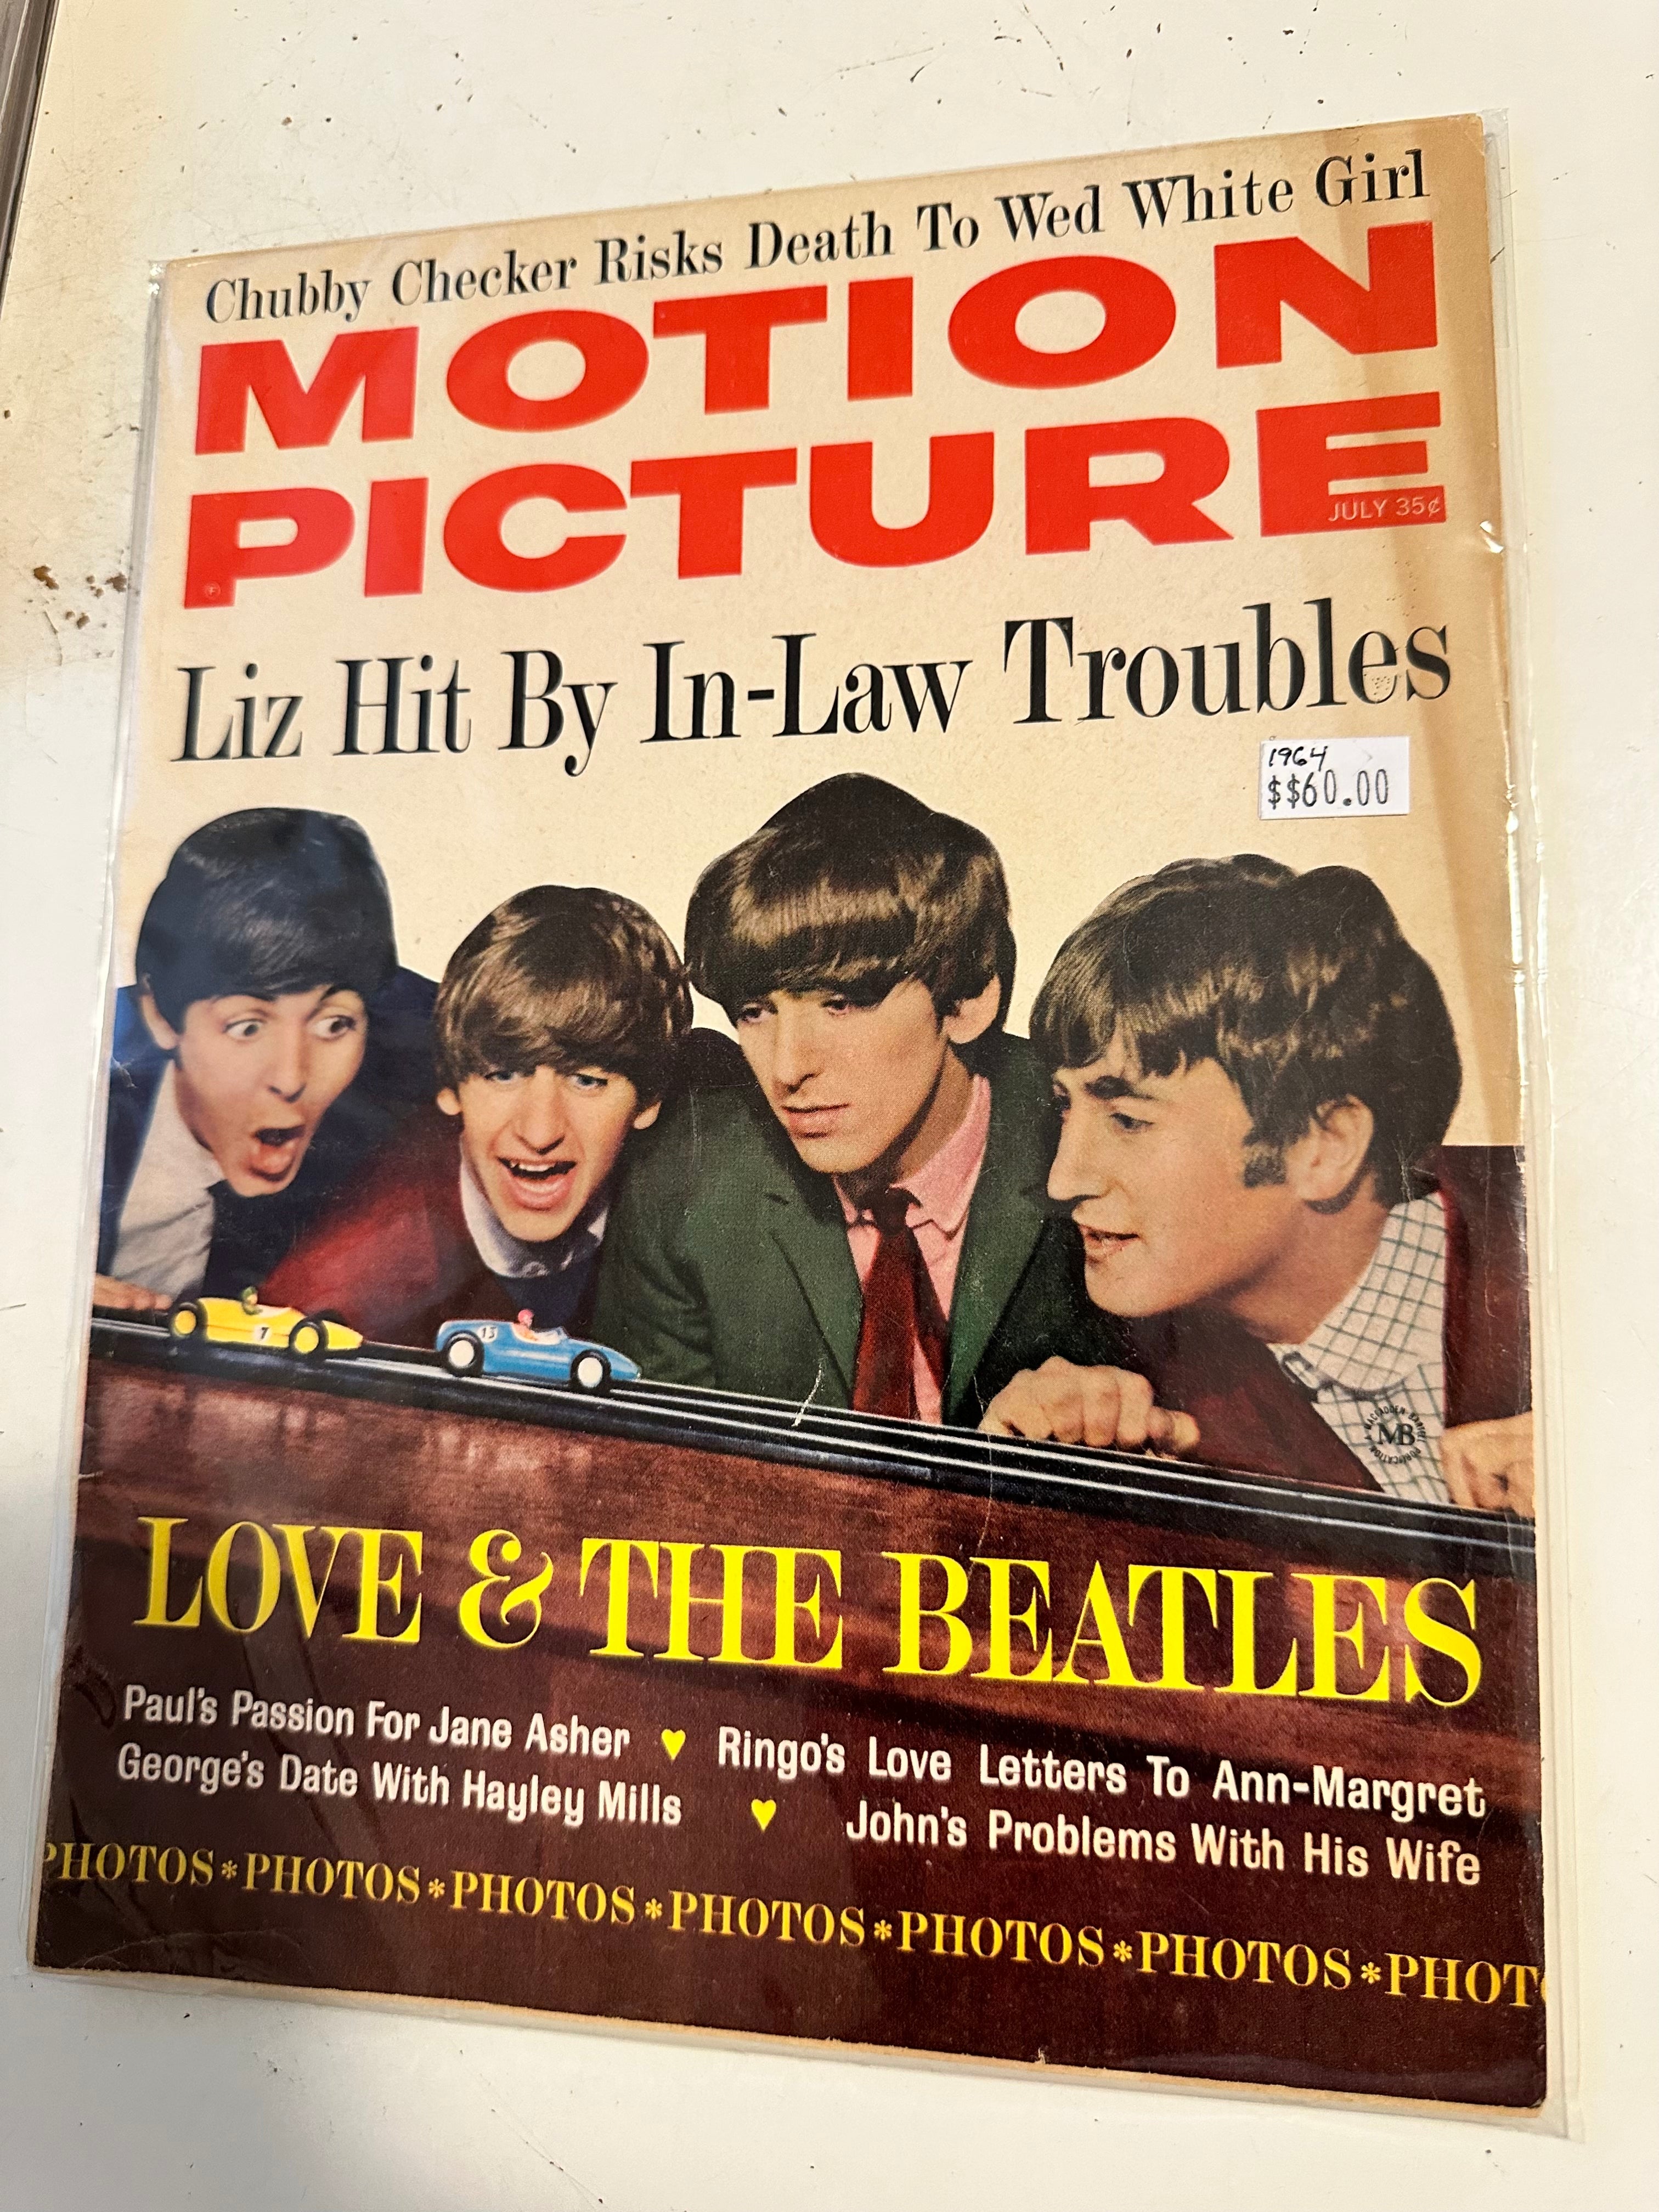 The Beatles featured in Motion Picture movie magazine 1964